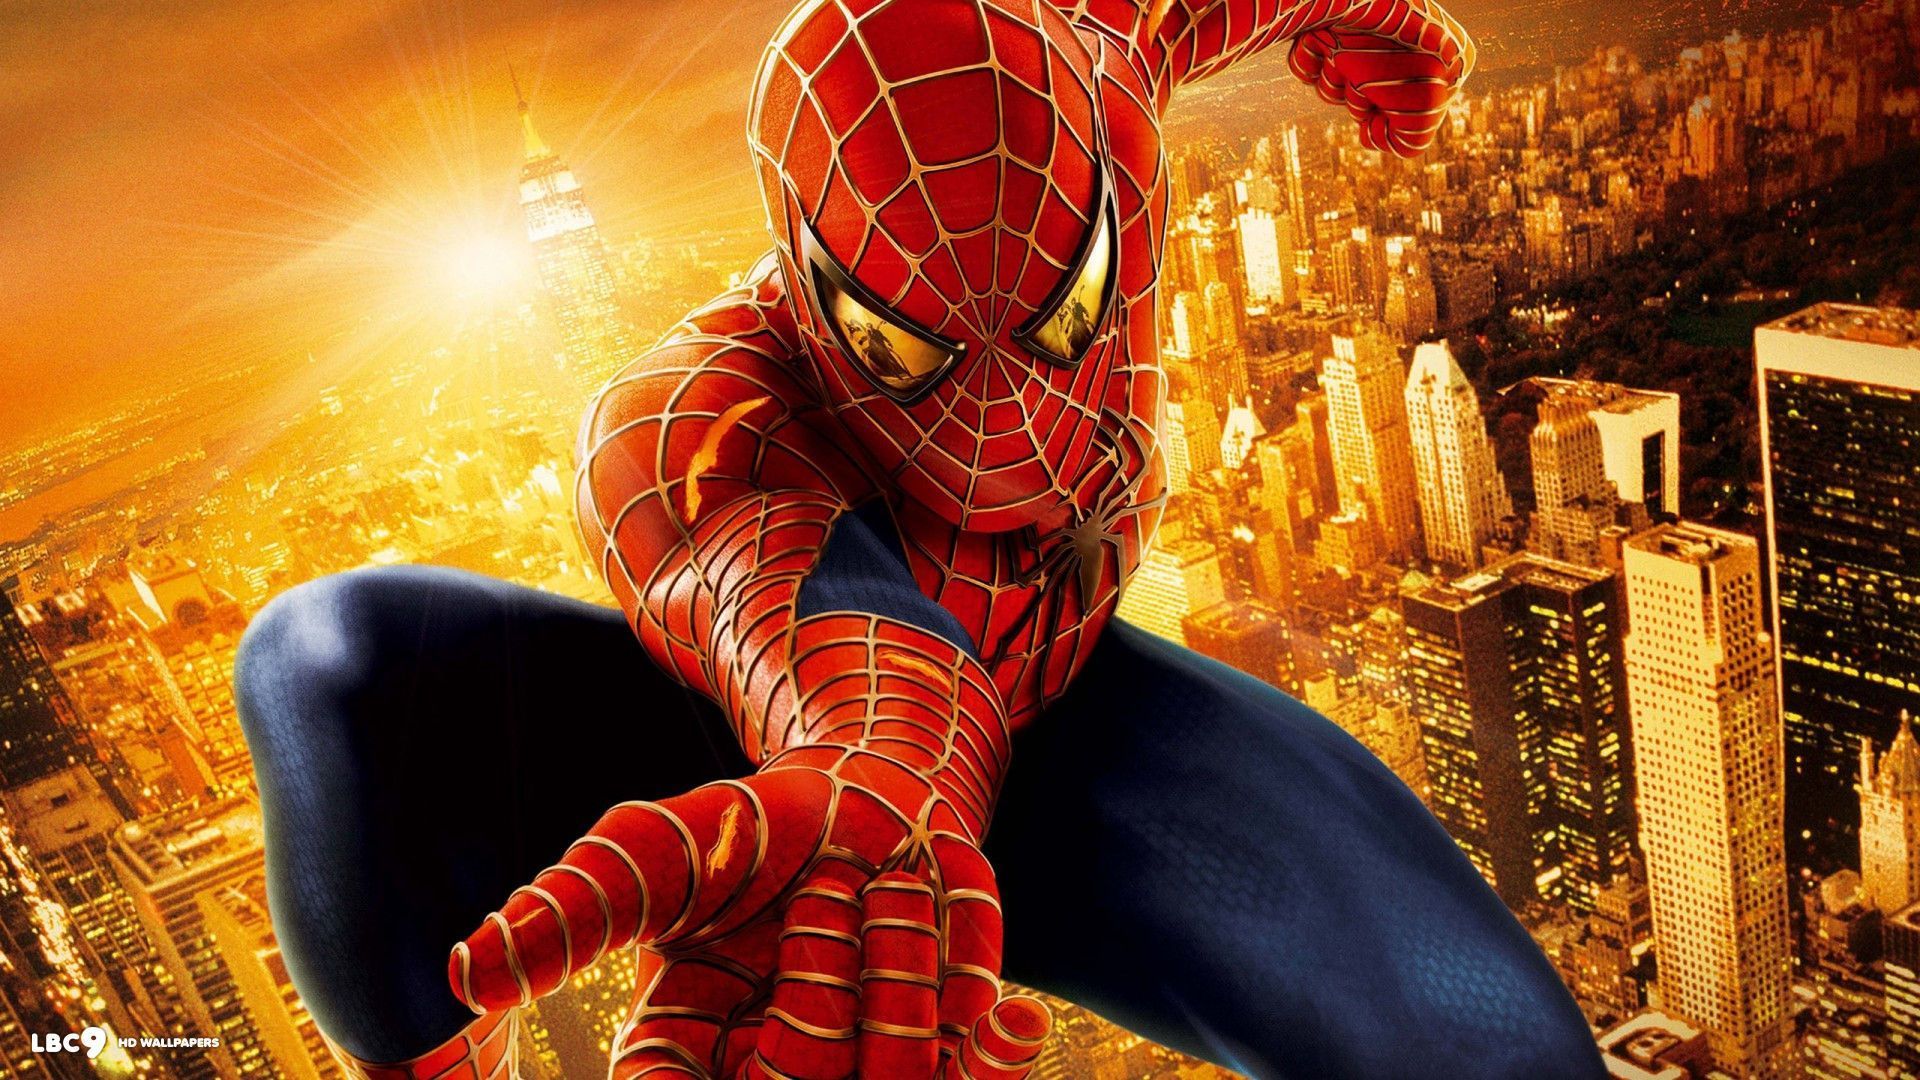 Spider man wallpaper 3 / 4 movie hd backgrounds